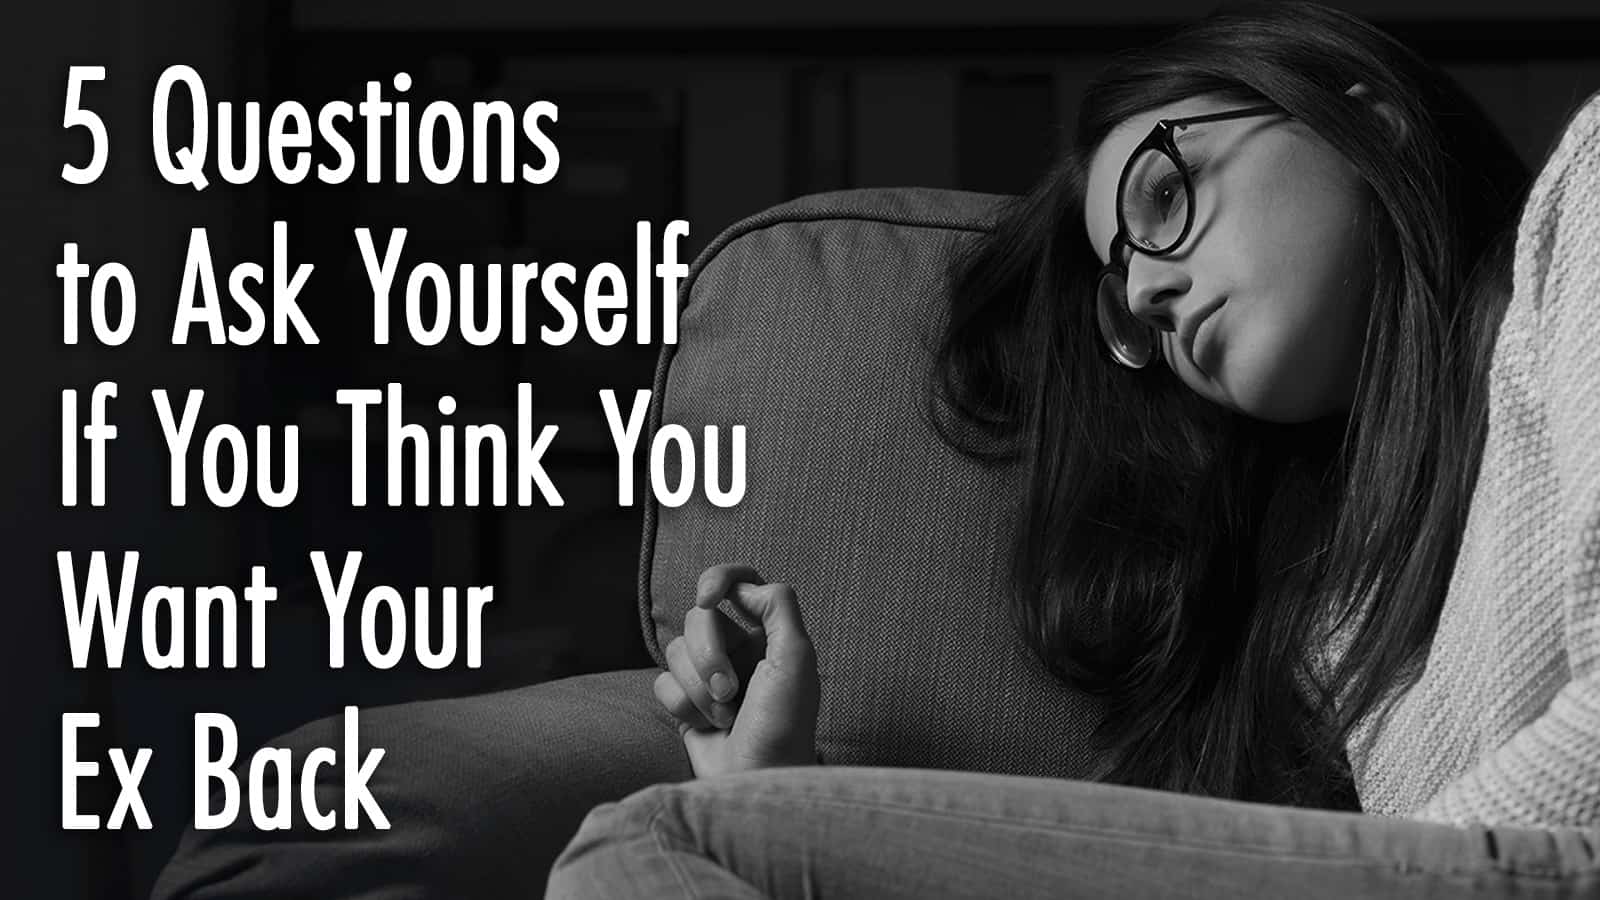 5 Questions to Ask Yourself If You Think You Want Your Ex Back